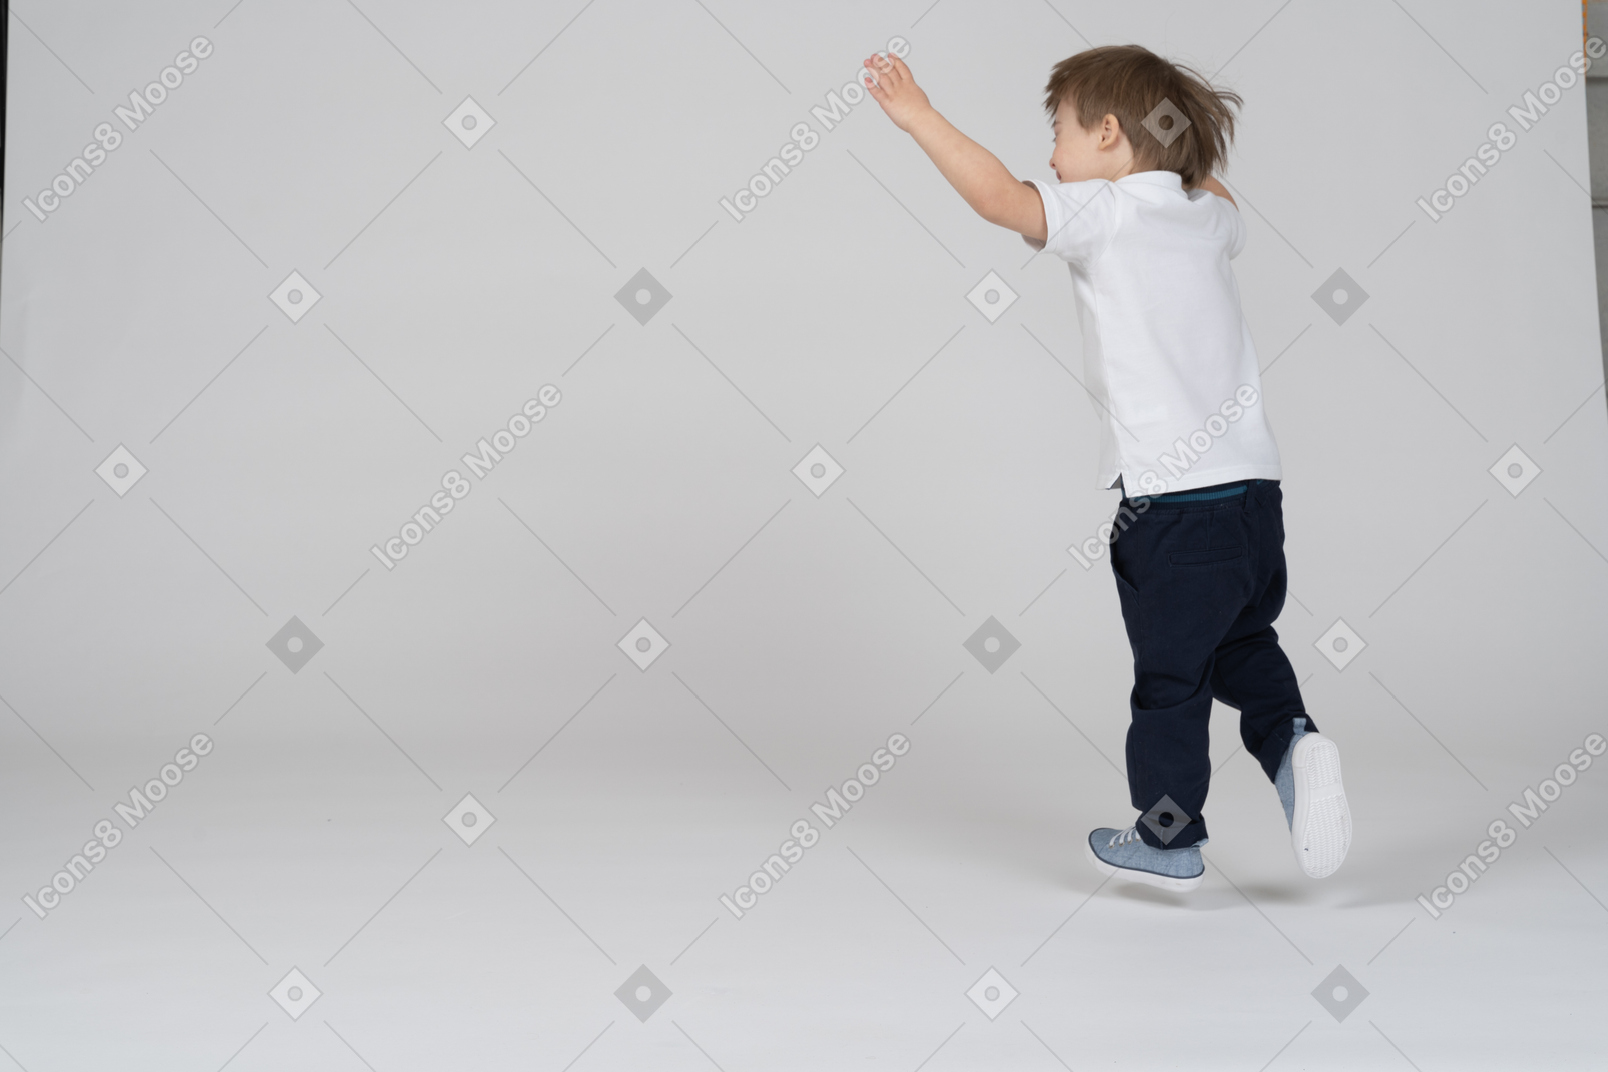 Back view of a boy running with hands raised